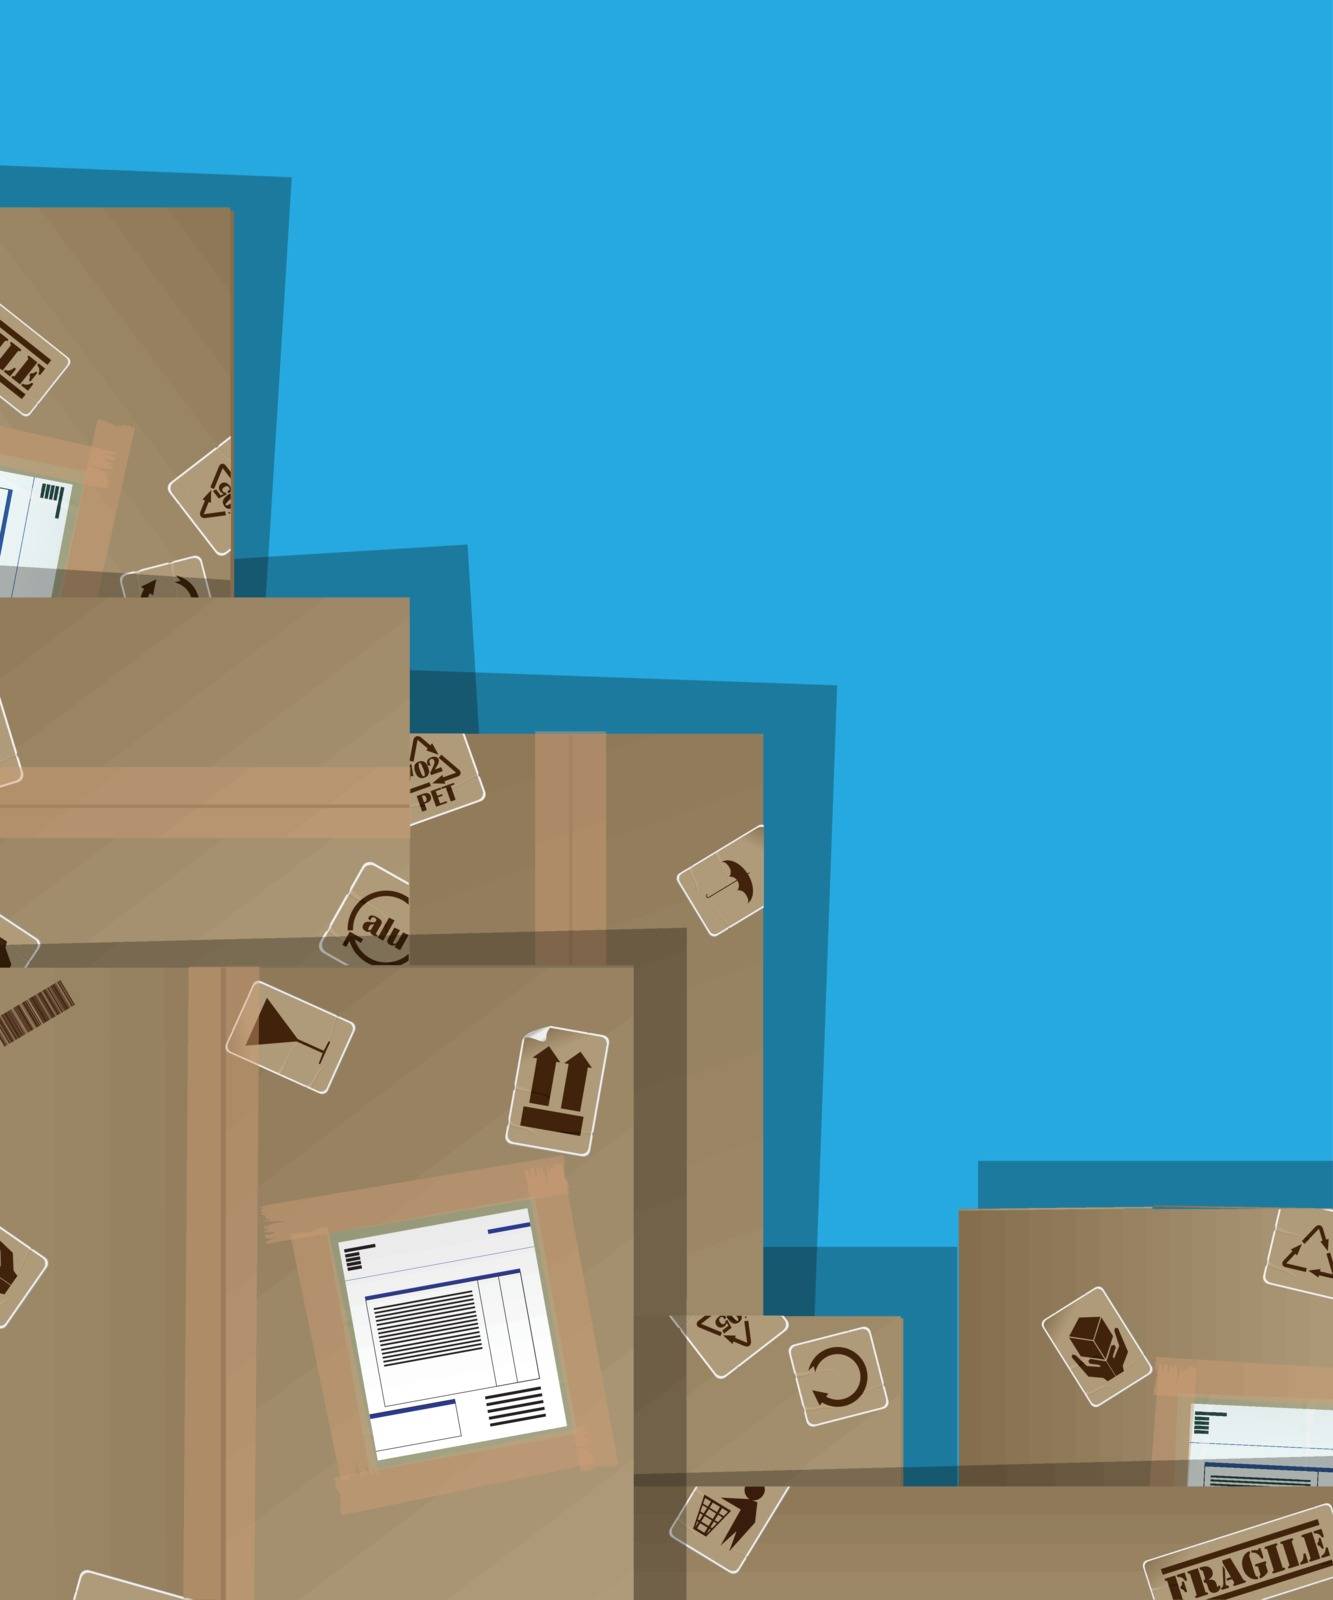 Pile of cardboard boxes illustration with copy paste